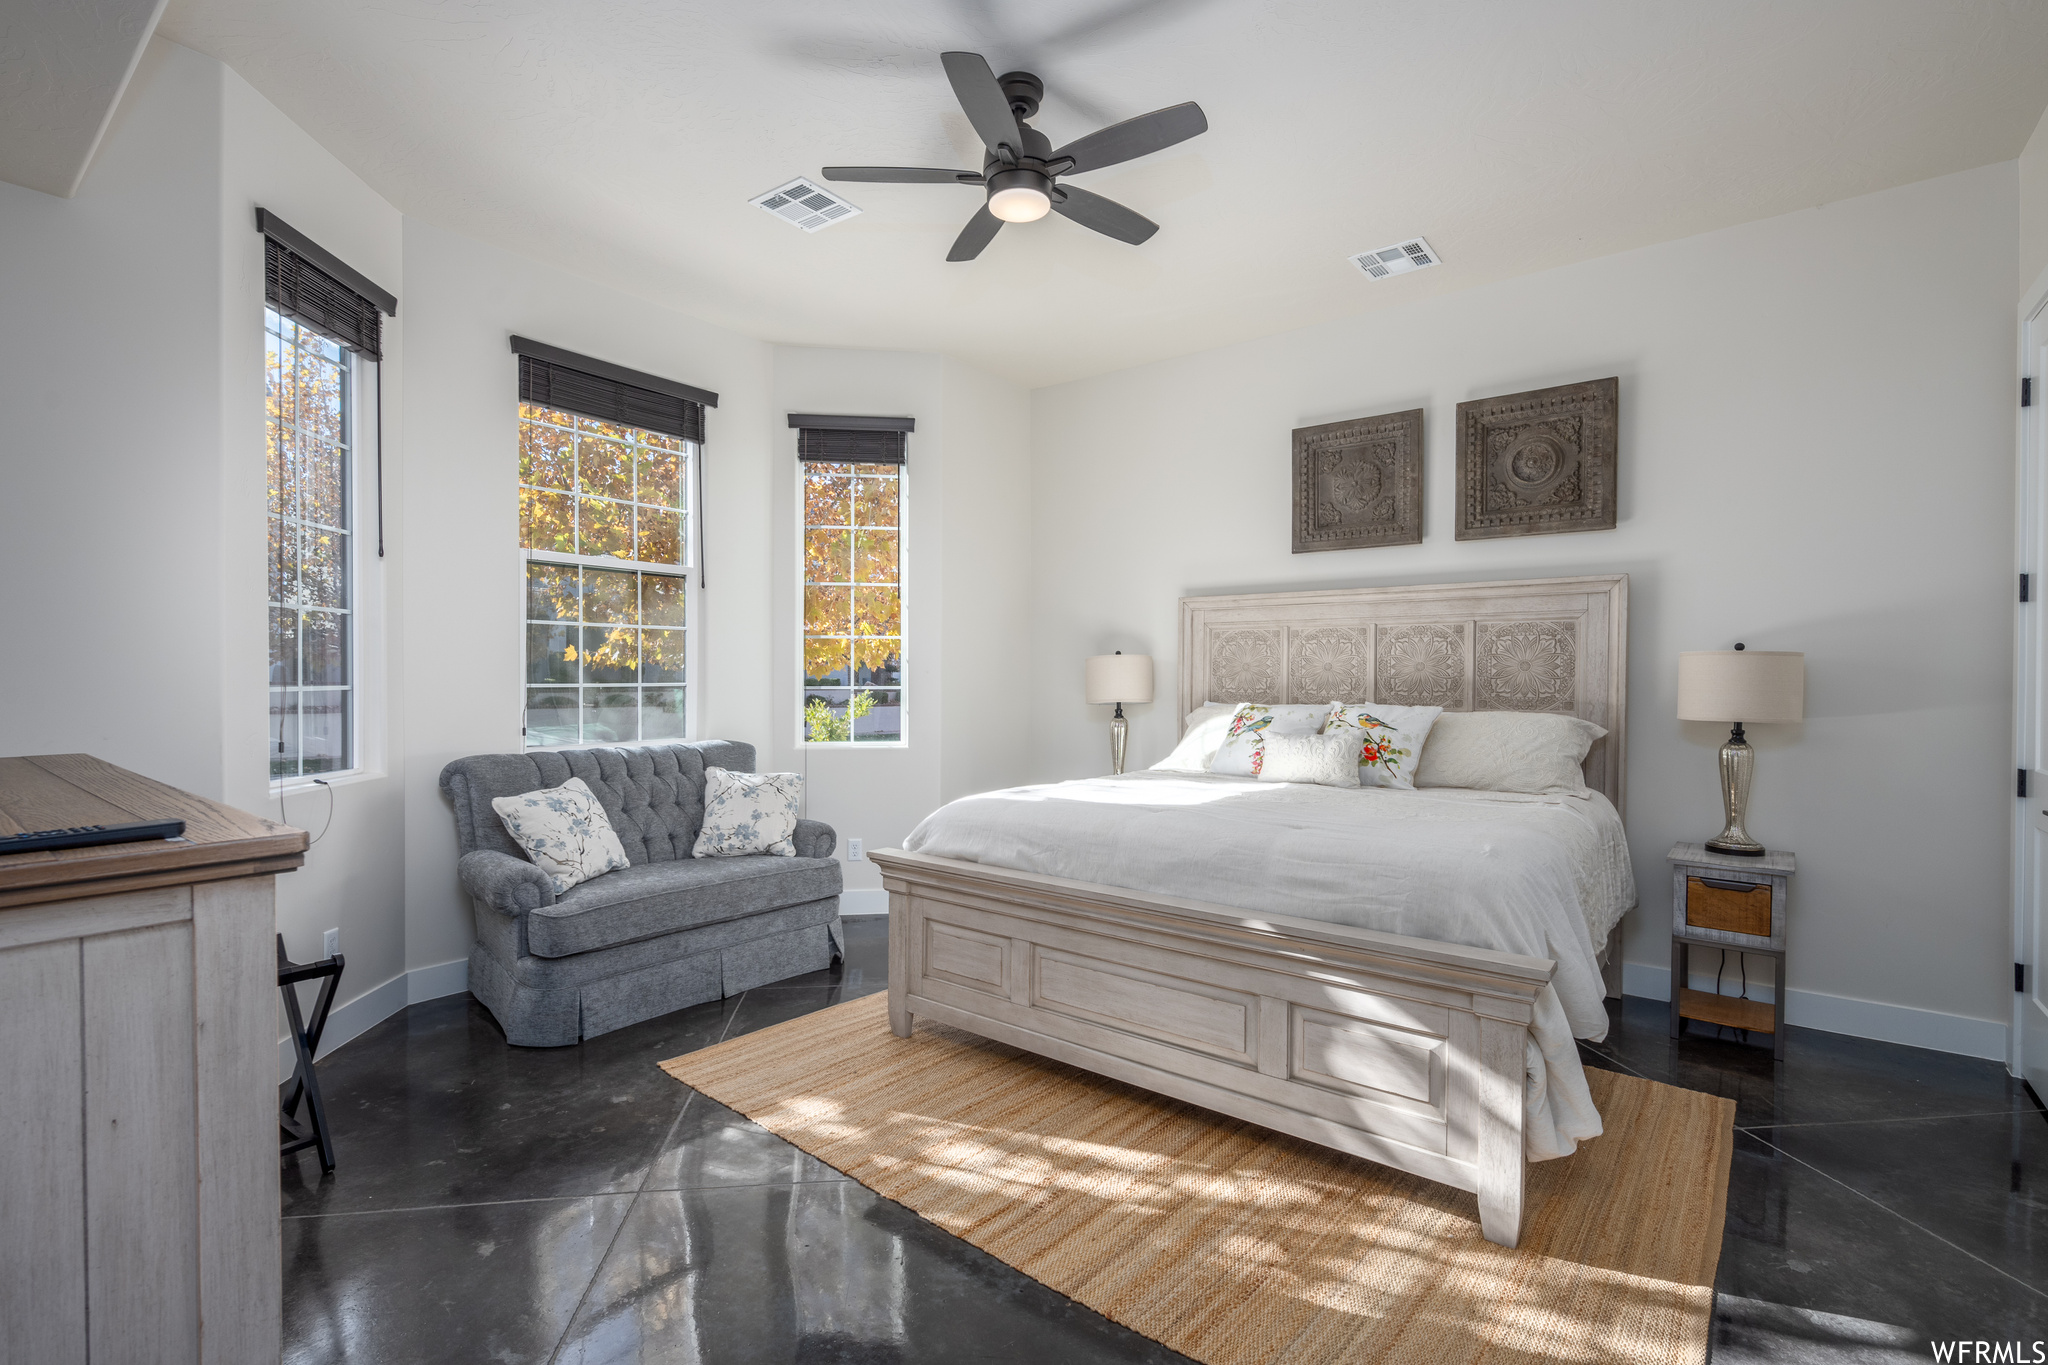 Tiled bedroom with ceiling fan and multiple windows